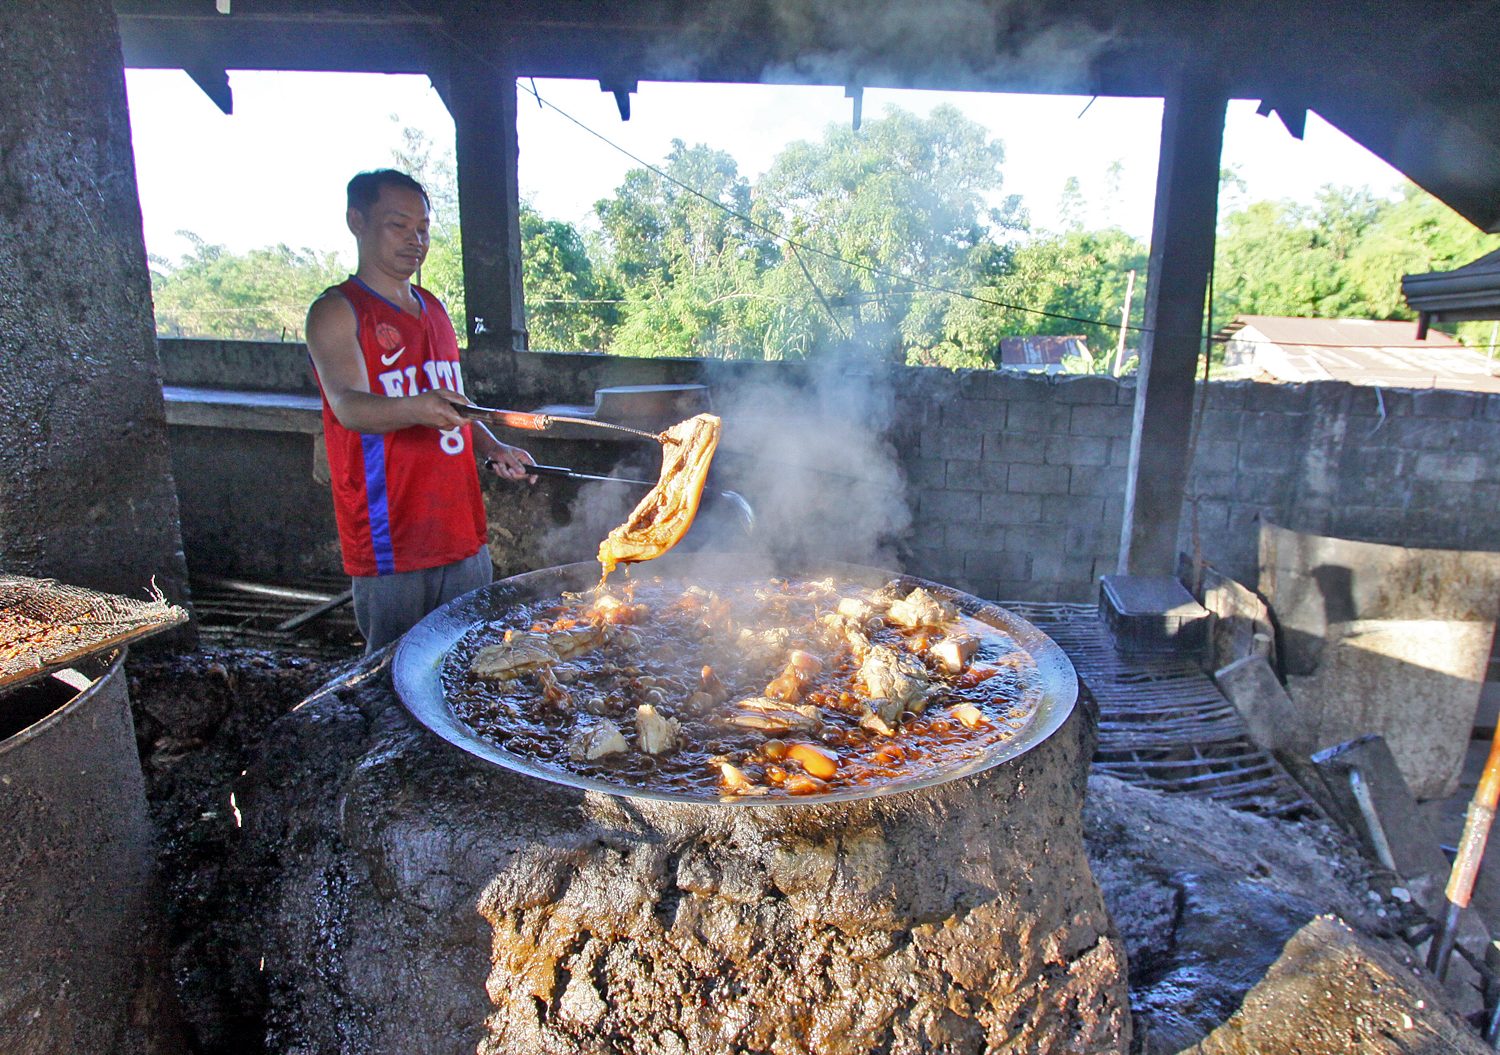 TRADITIONAL WAY. Backyard workers are up 1 am daily to prepare bagnet, which cooks for 3 straight hours in the kawa using firewood. Bagnet chunks  are ready by 6 am in the public market for early travelers who buy in bulk.   